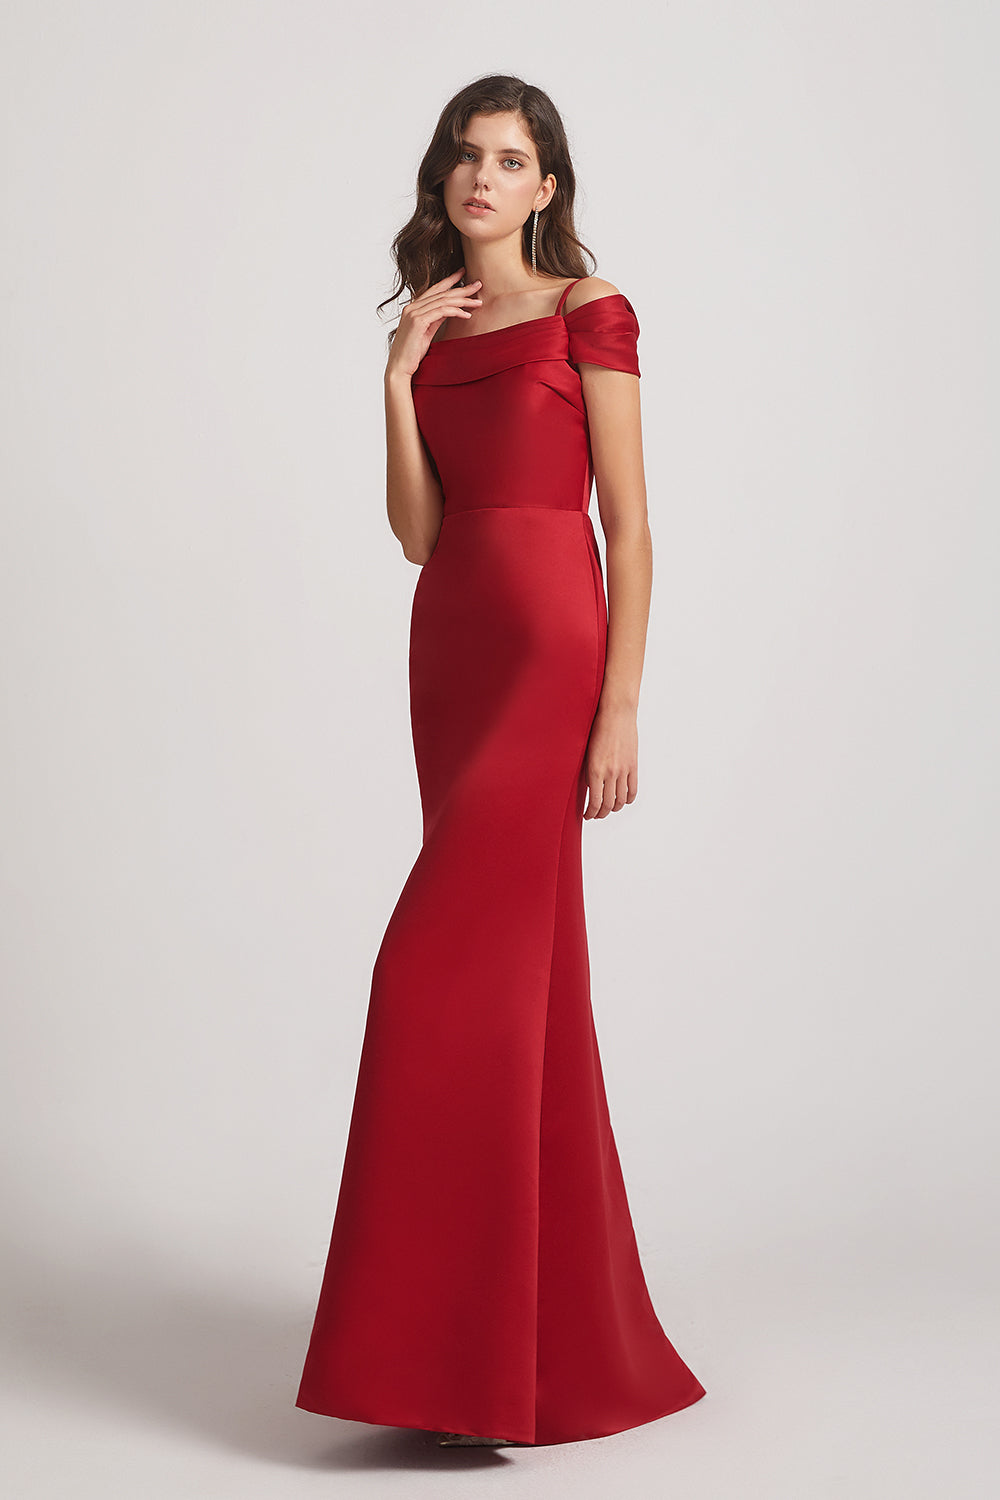 red off the shoulder maxi bridesmaid gown